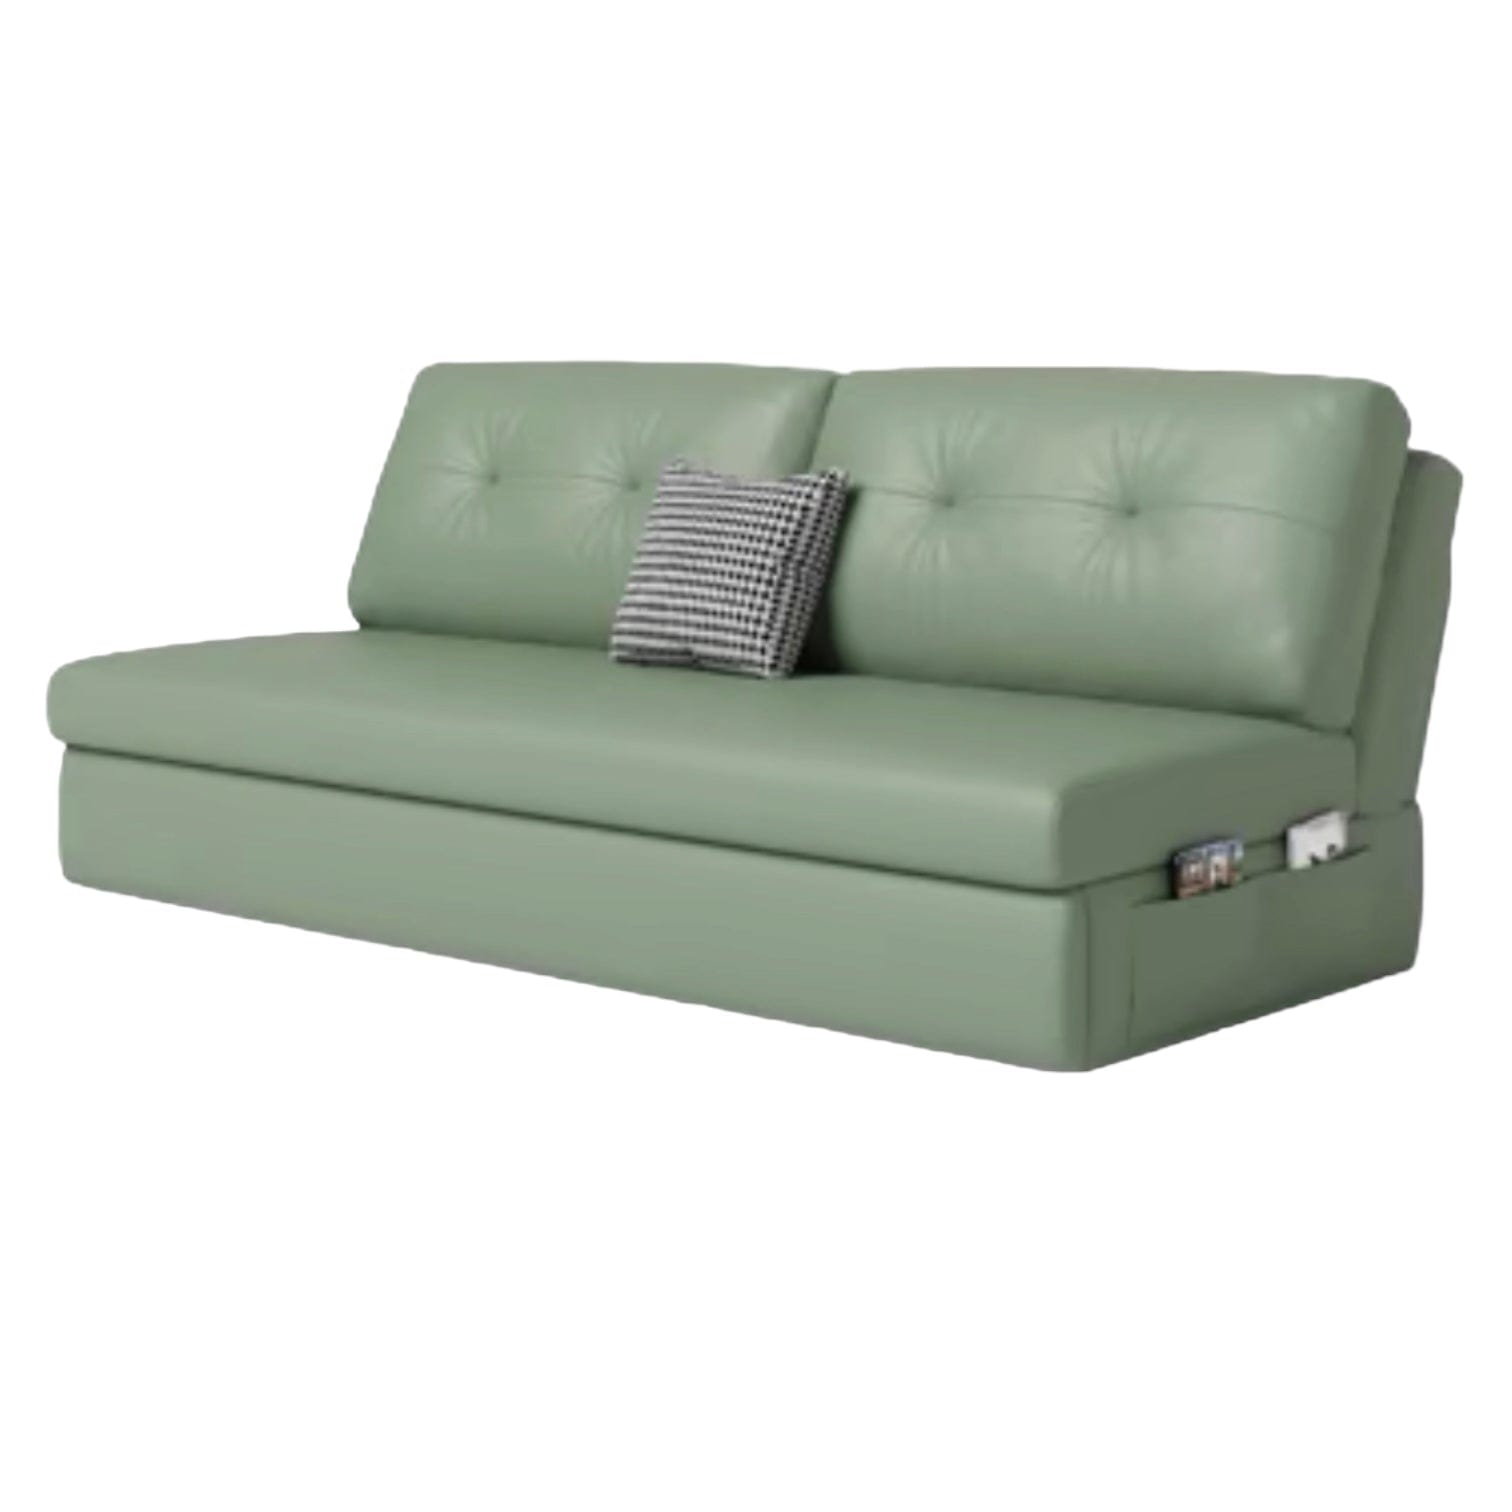 Home Atelier Denise Scratch Resistant Storage Sofa Bed